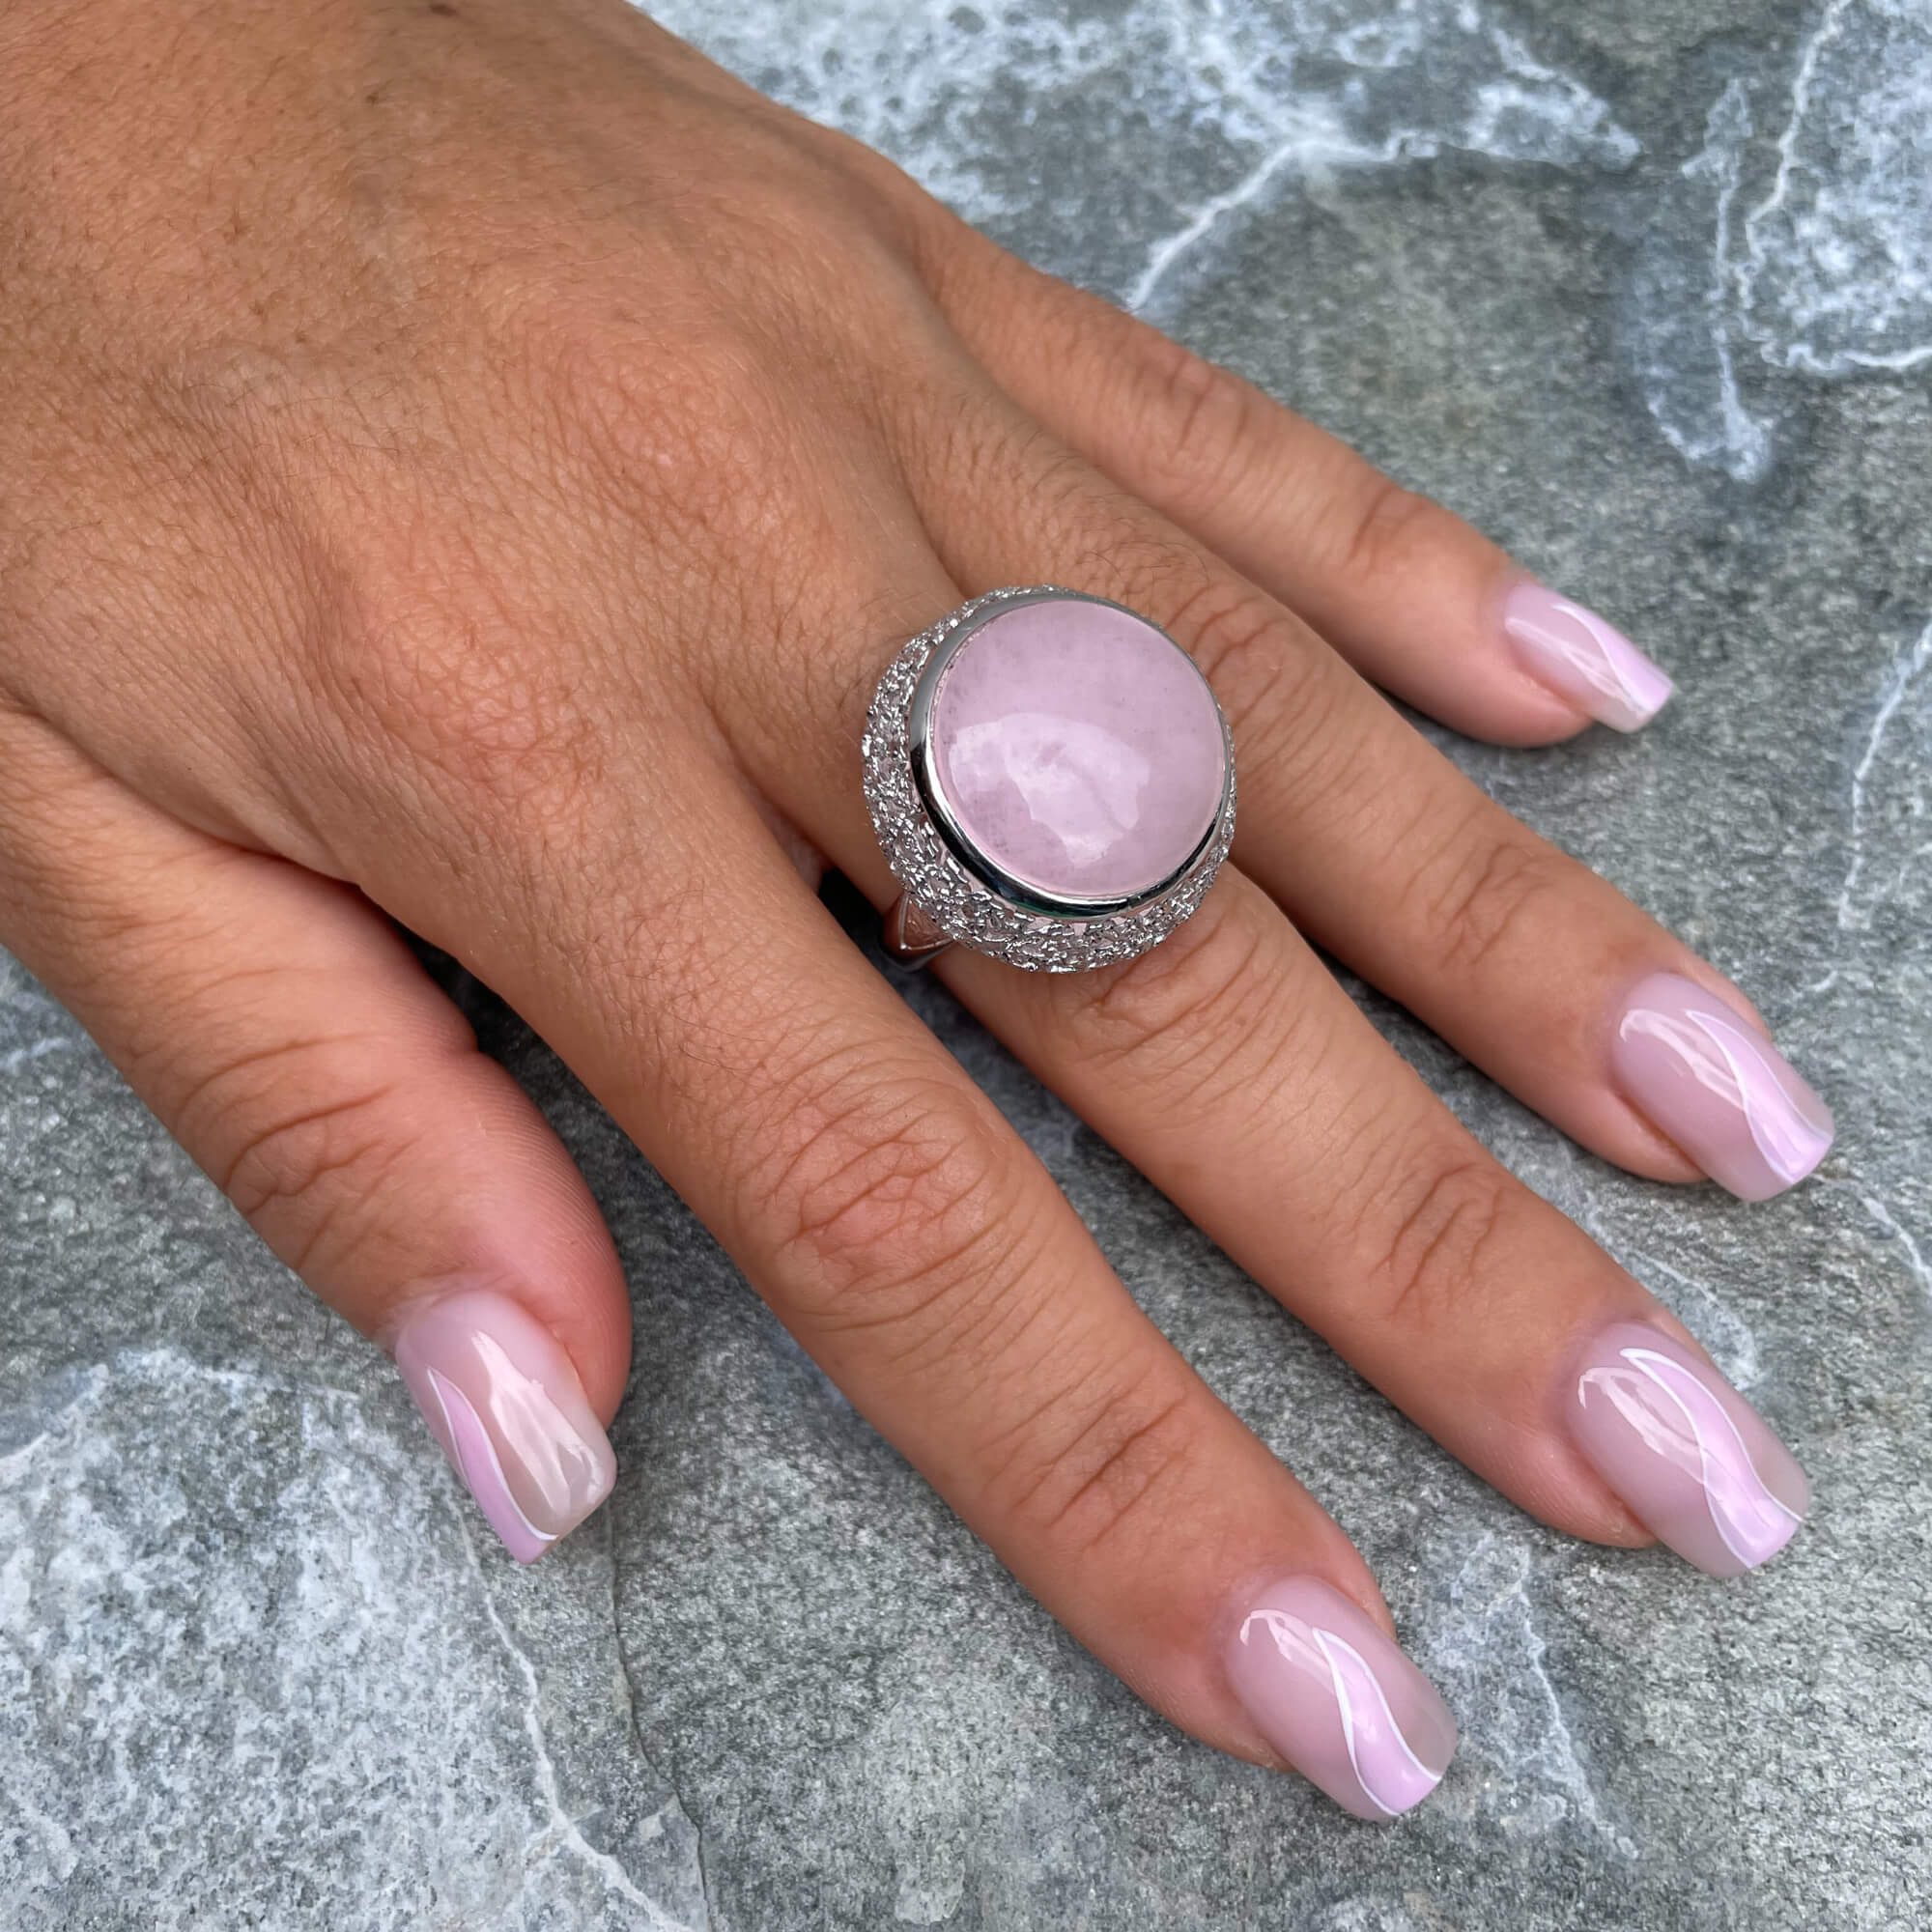 Crafted silver ring with a pink quartz stone